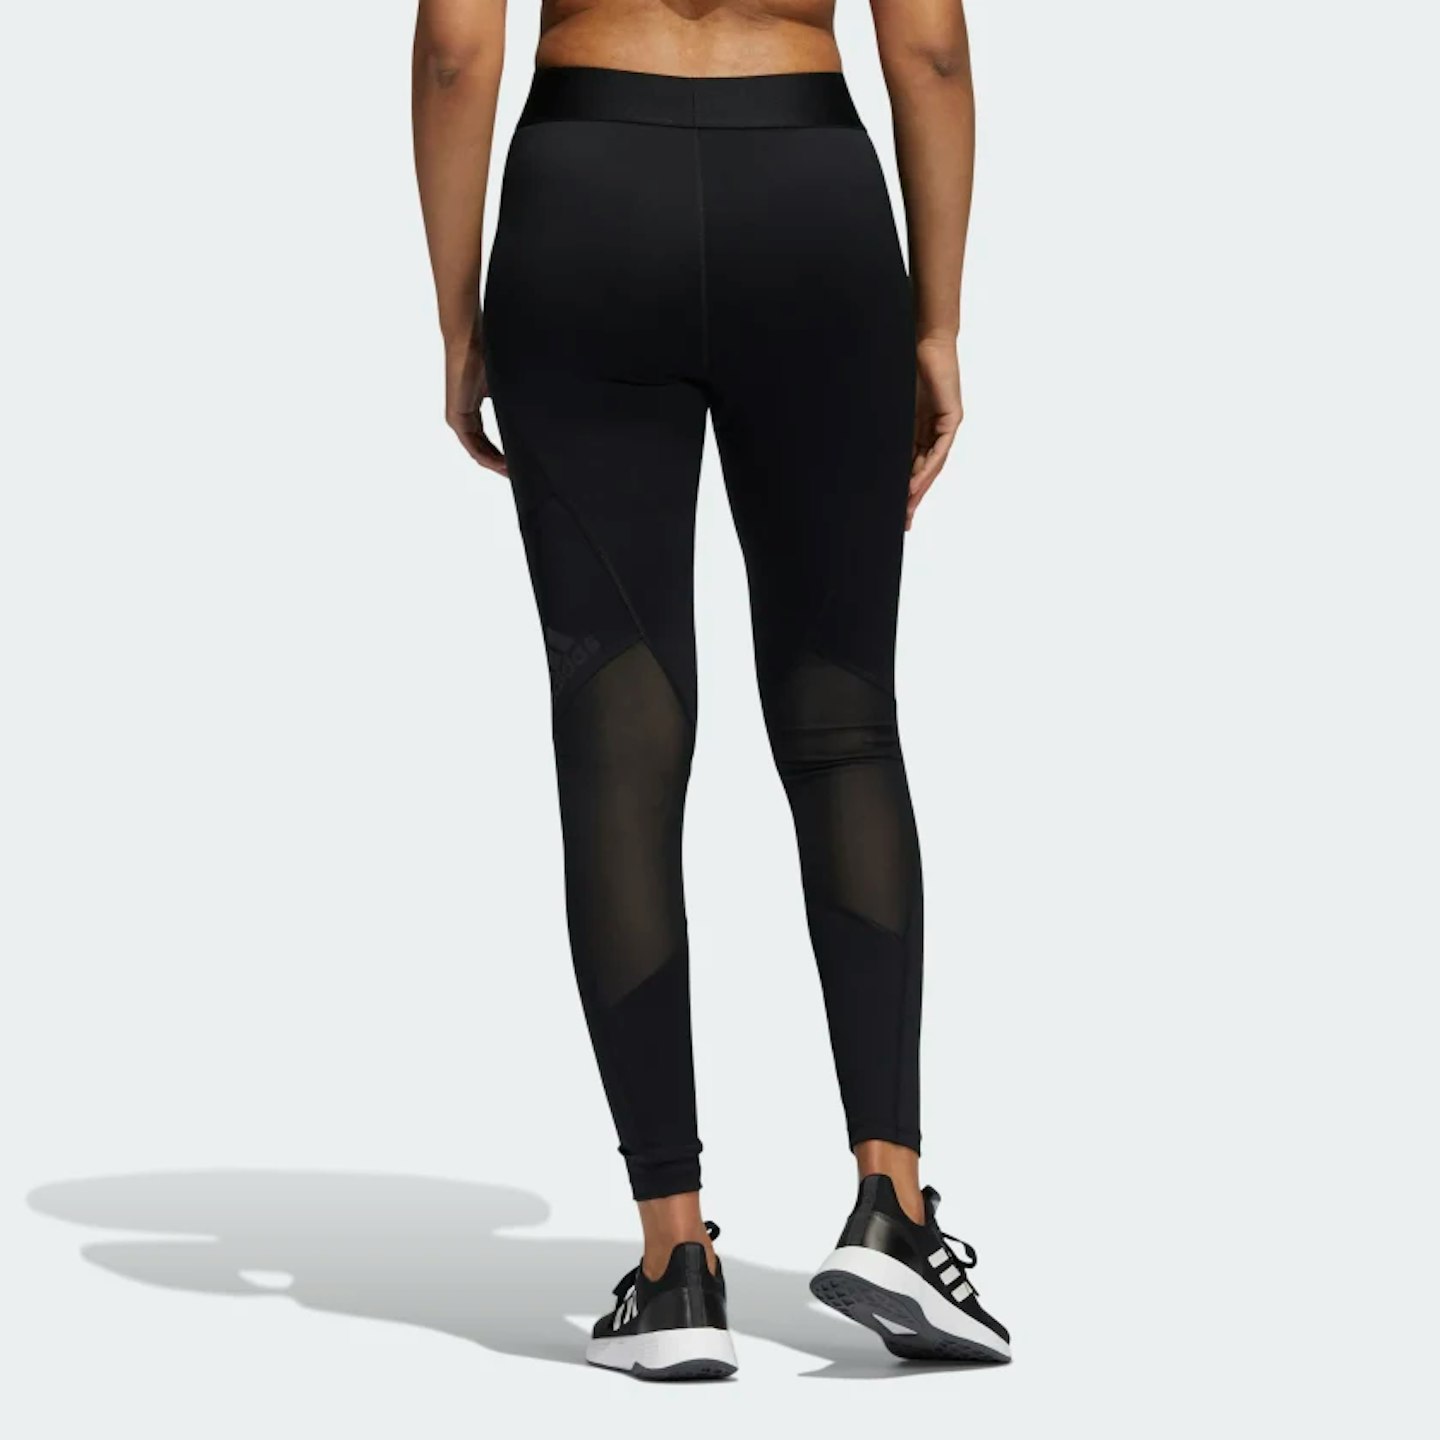 Modibodi period leggings review: Do they live up to the hype